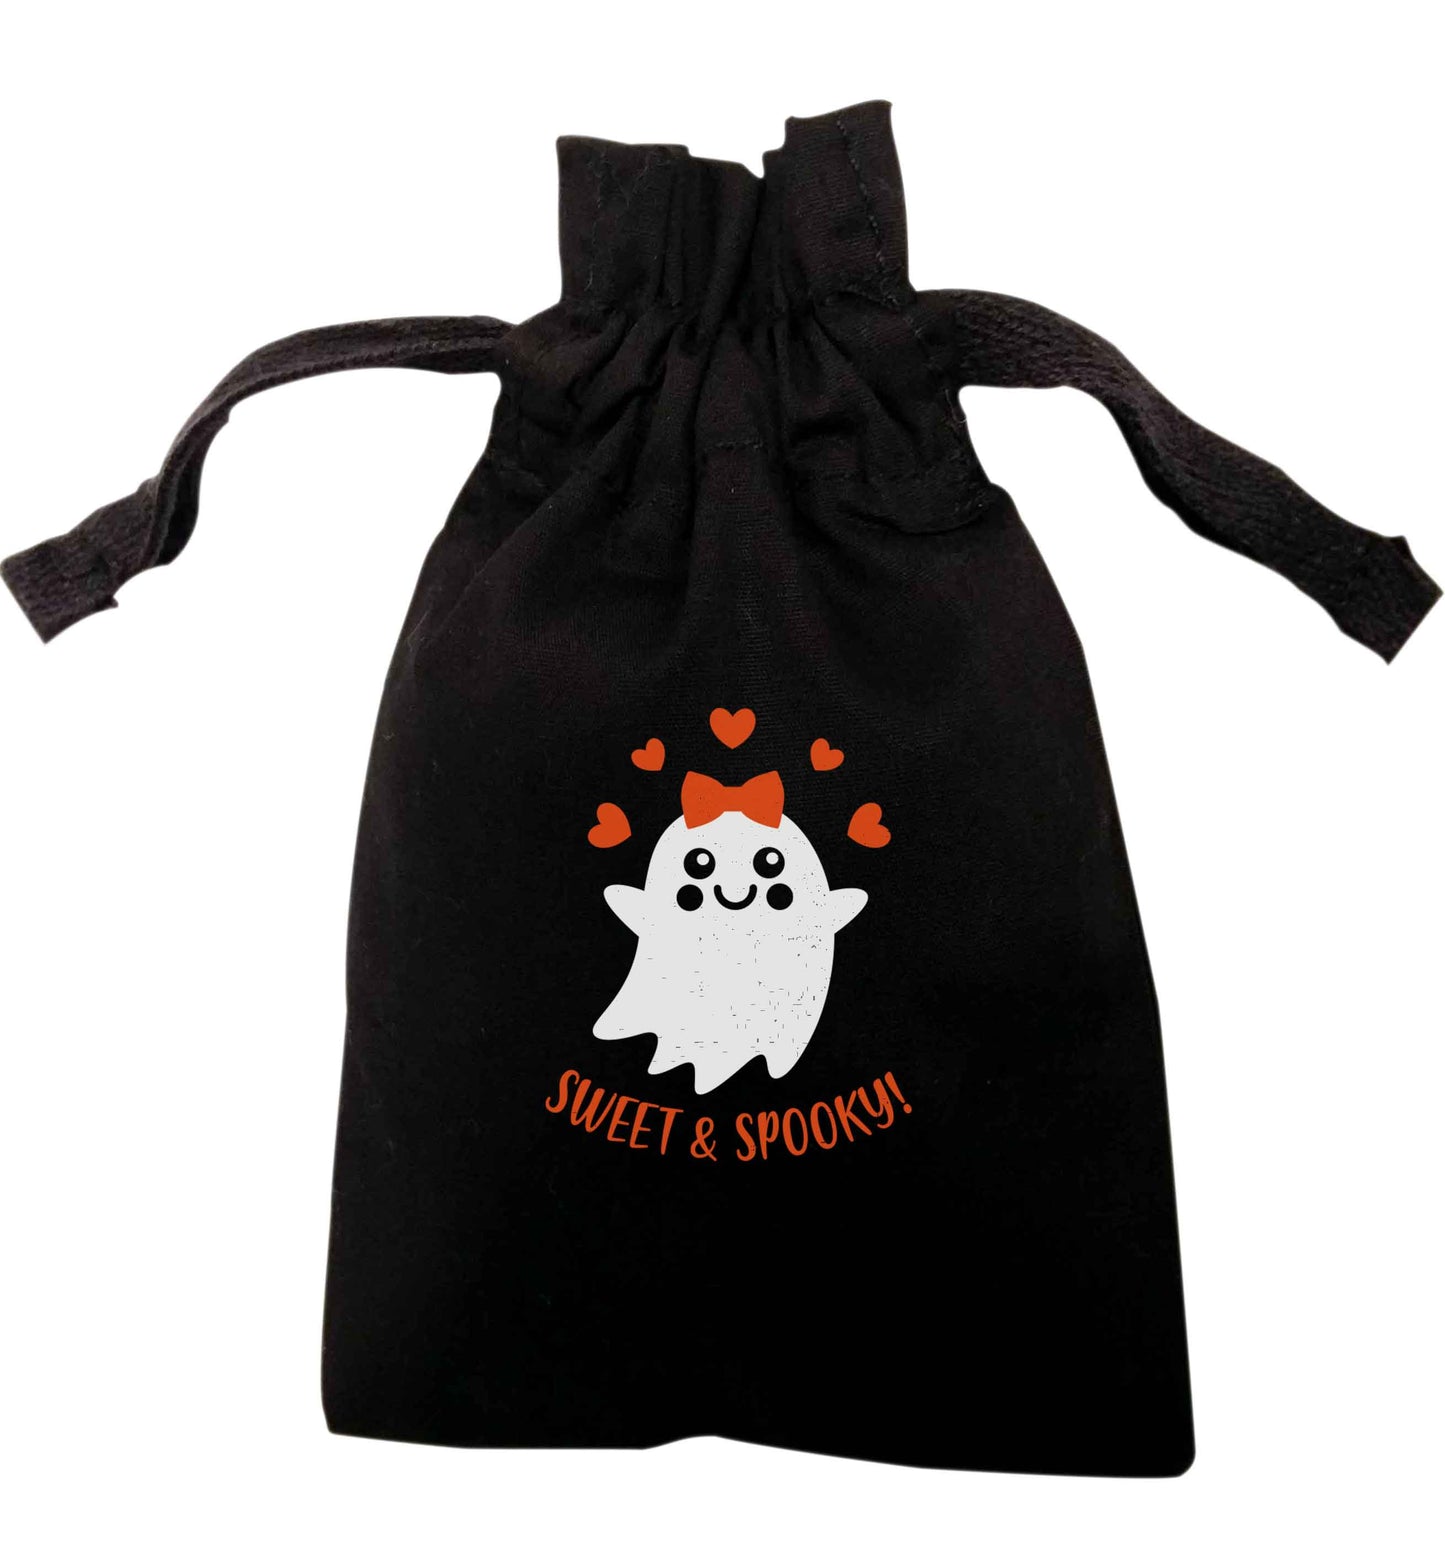 Sweet and spooky | XS - L | Pouch / Drawstring bag / Sack | Organic Cotton | Bulk discounts available!